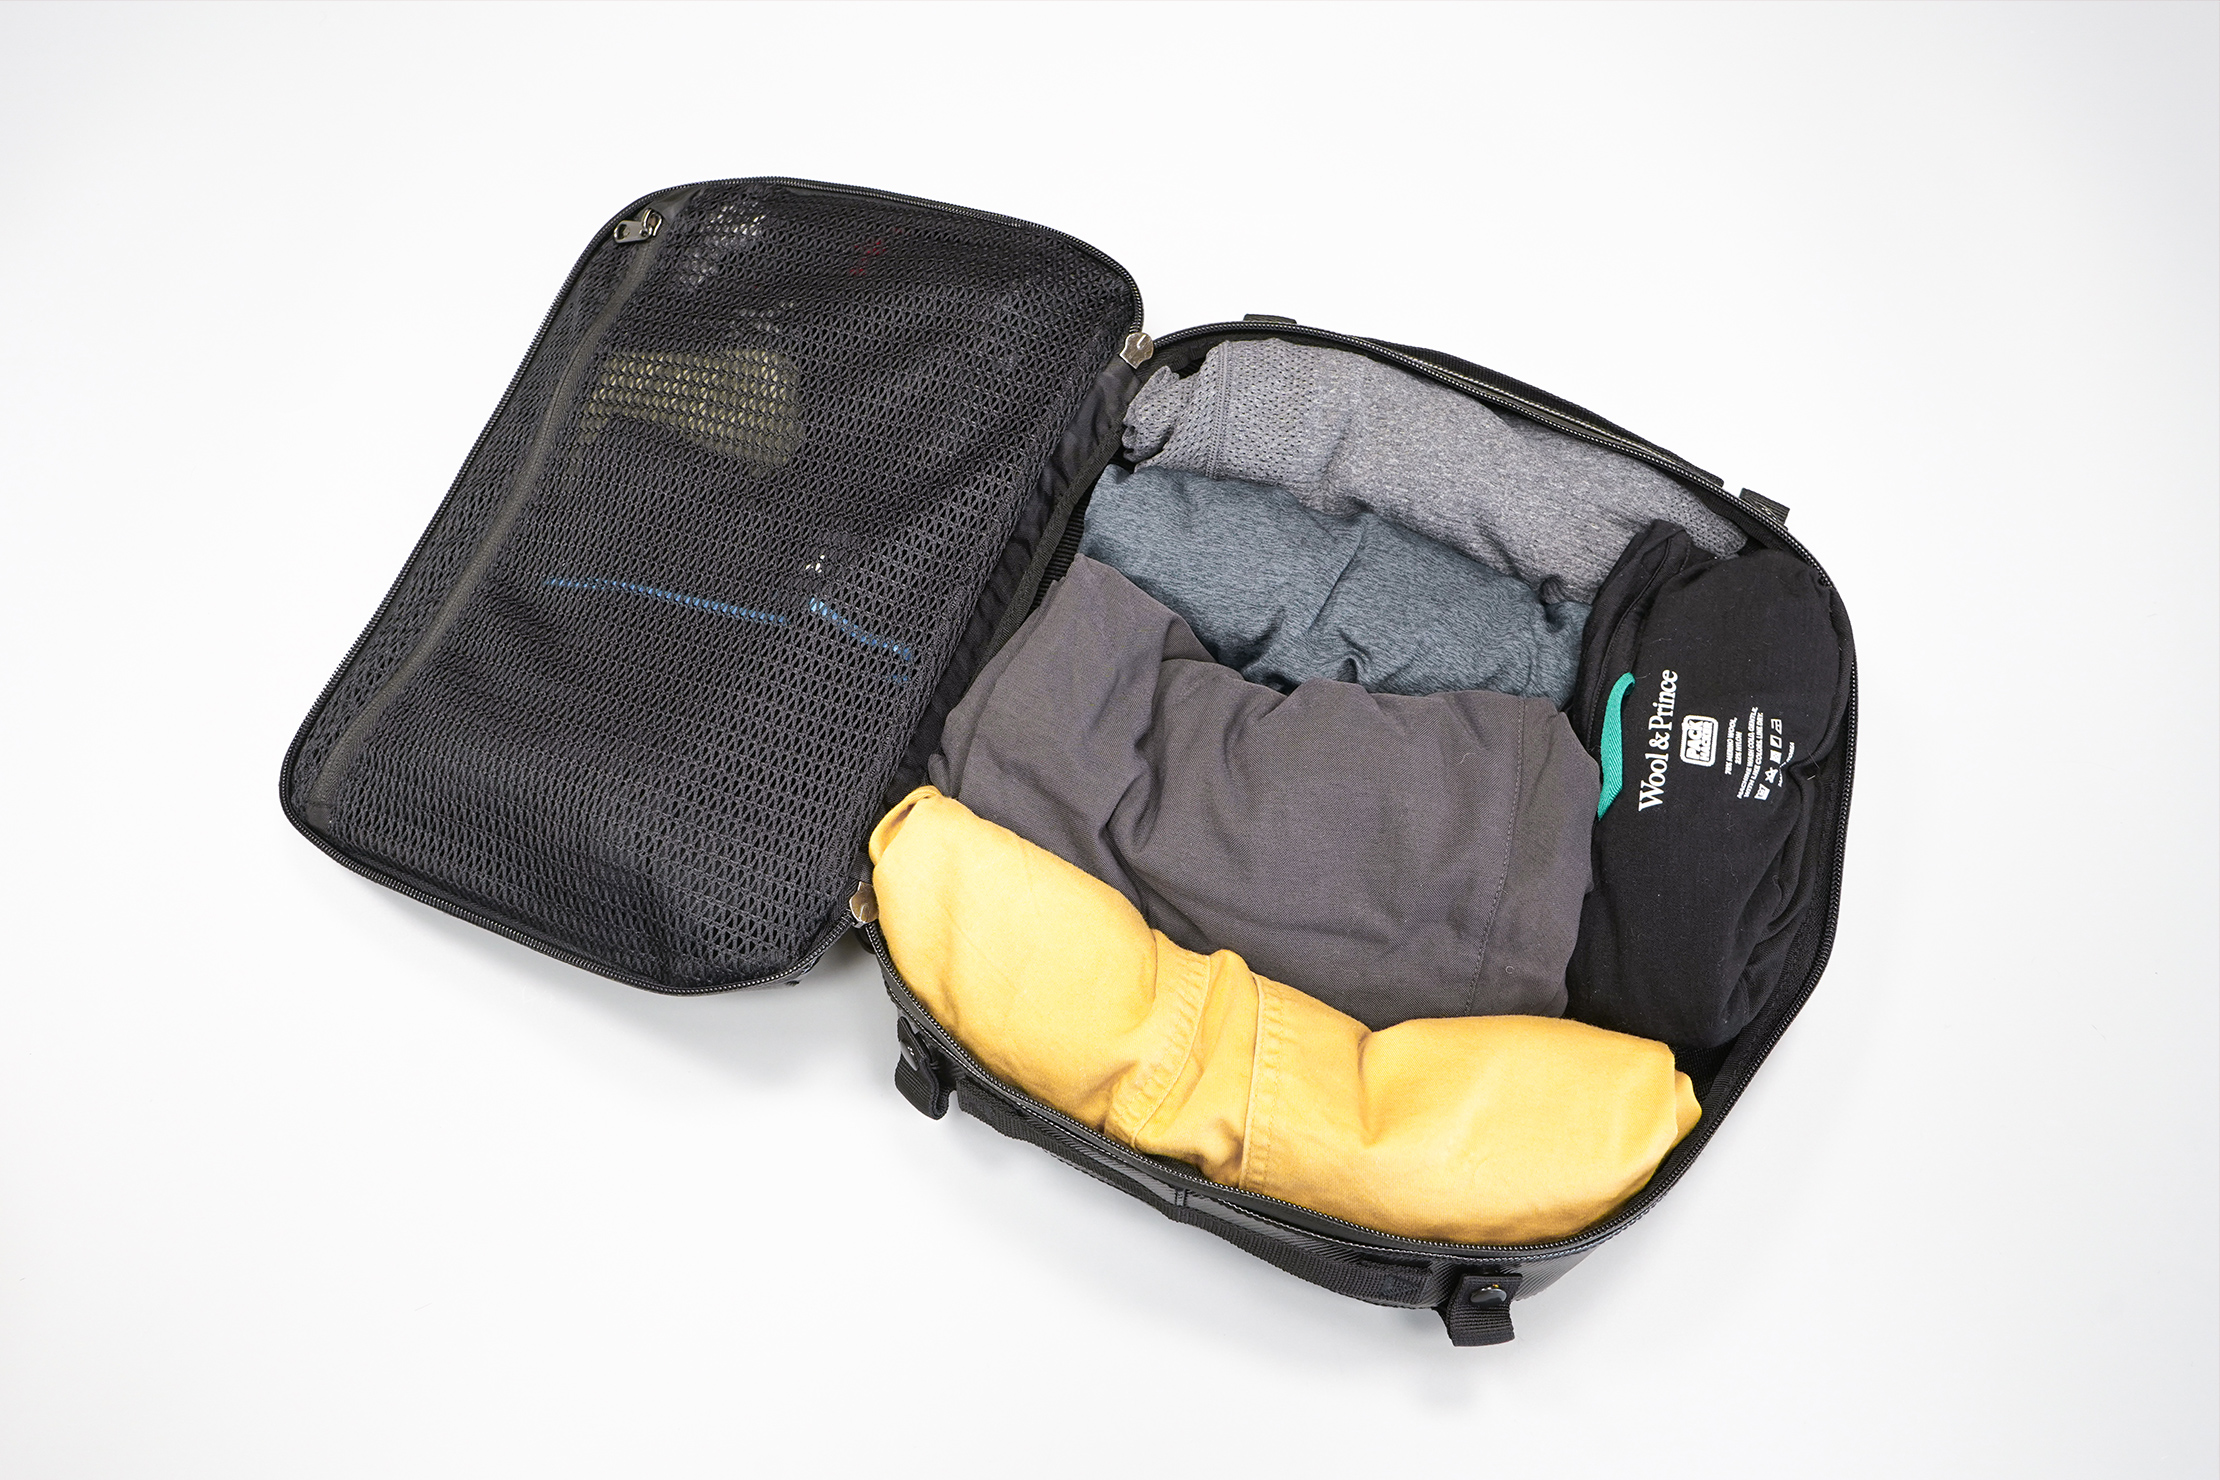 Inside the medium Eagle Creek Pack-It Gear packing cube